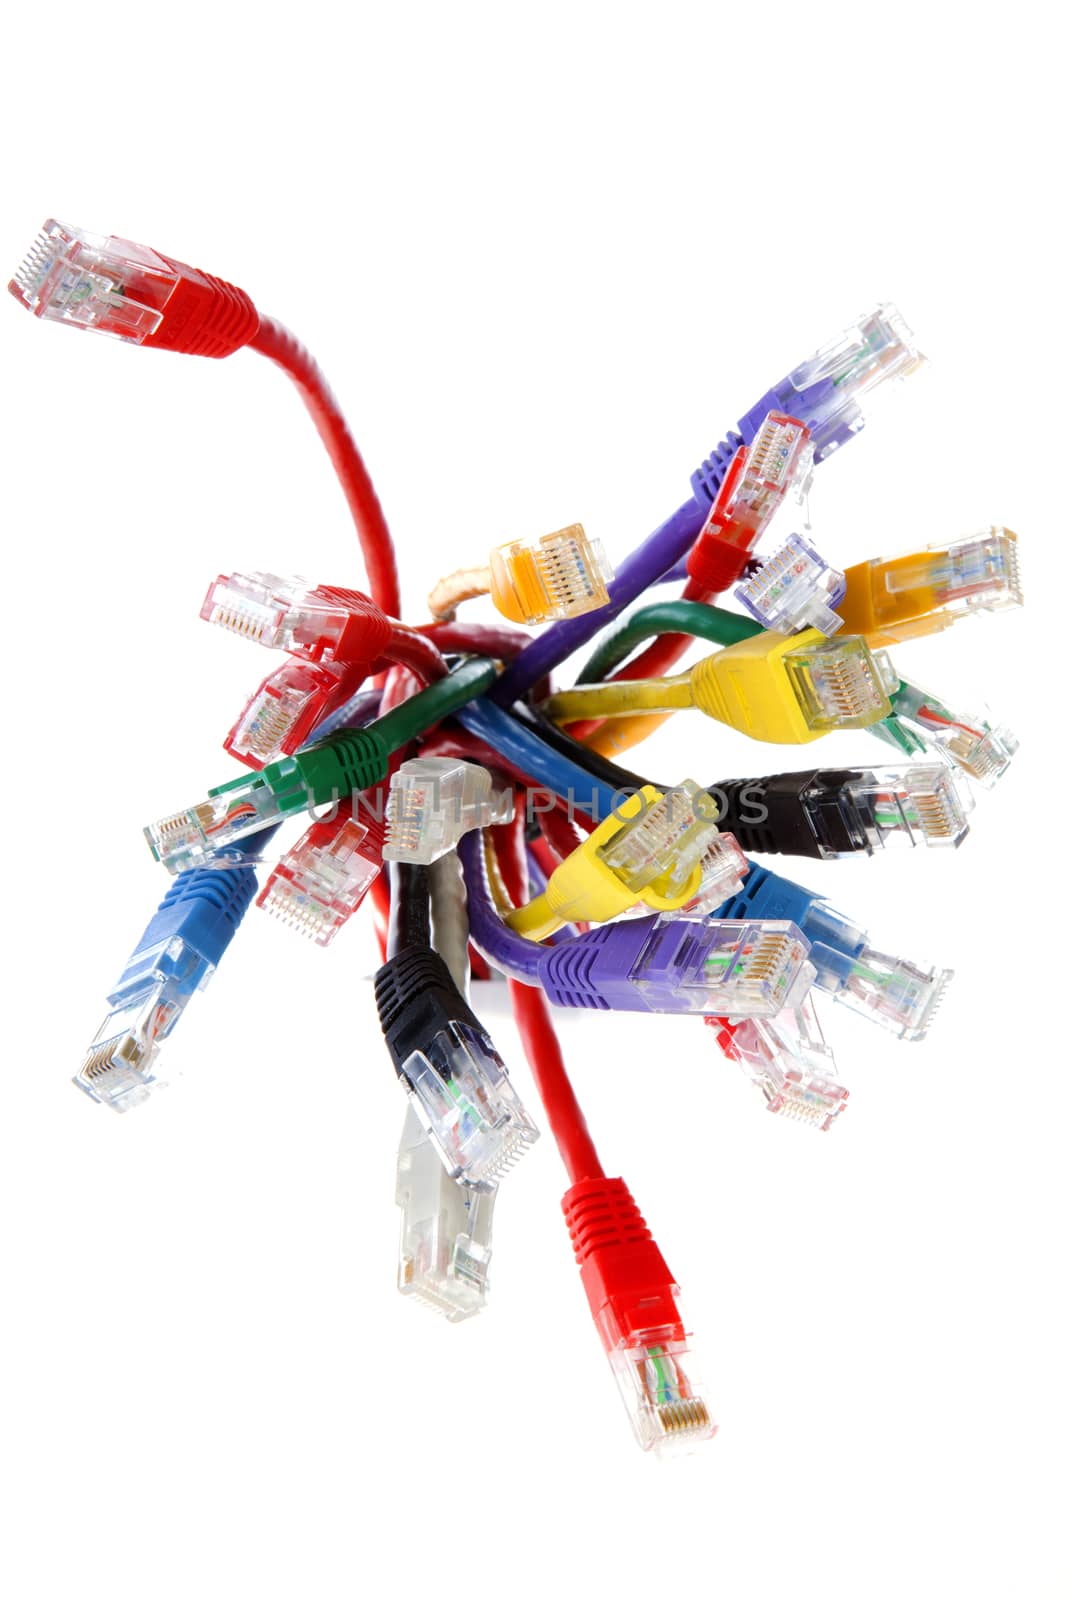 Bunch of colorful cables over white background